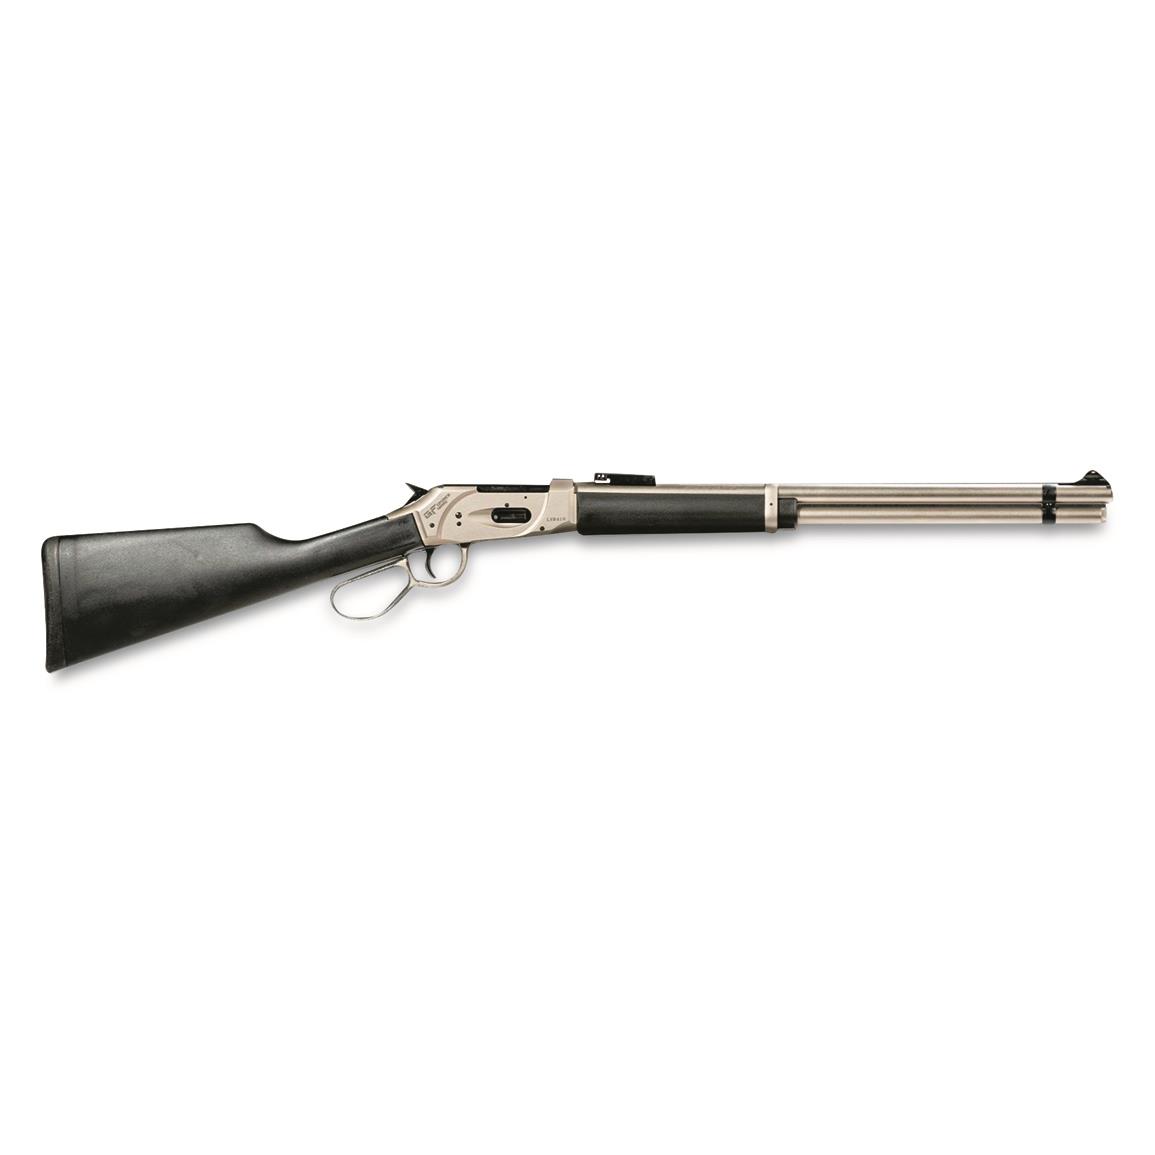 GForce Arms Huckleberry, Lever Action, .410 Bore, 20" Barrel, Synthetic, 7+1 Rounds